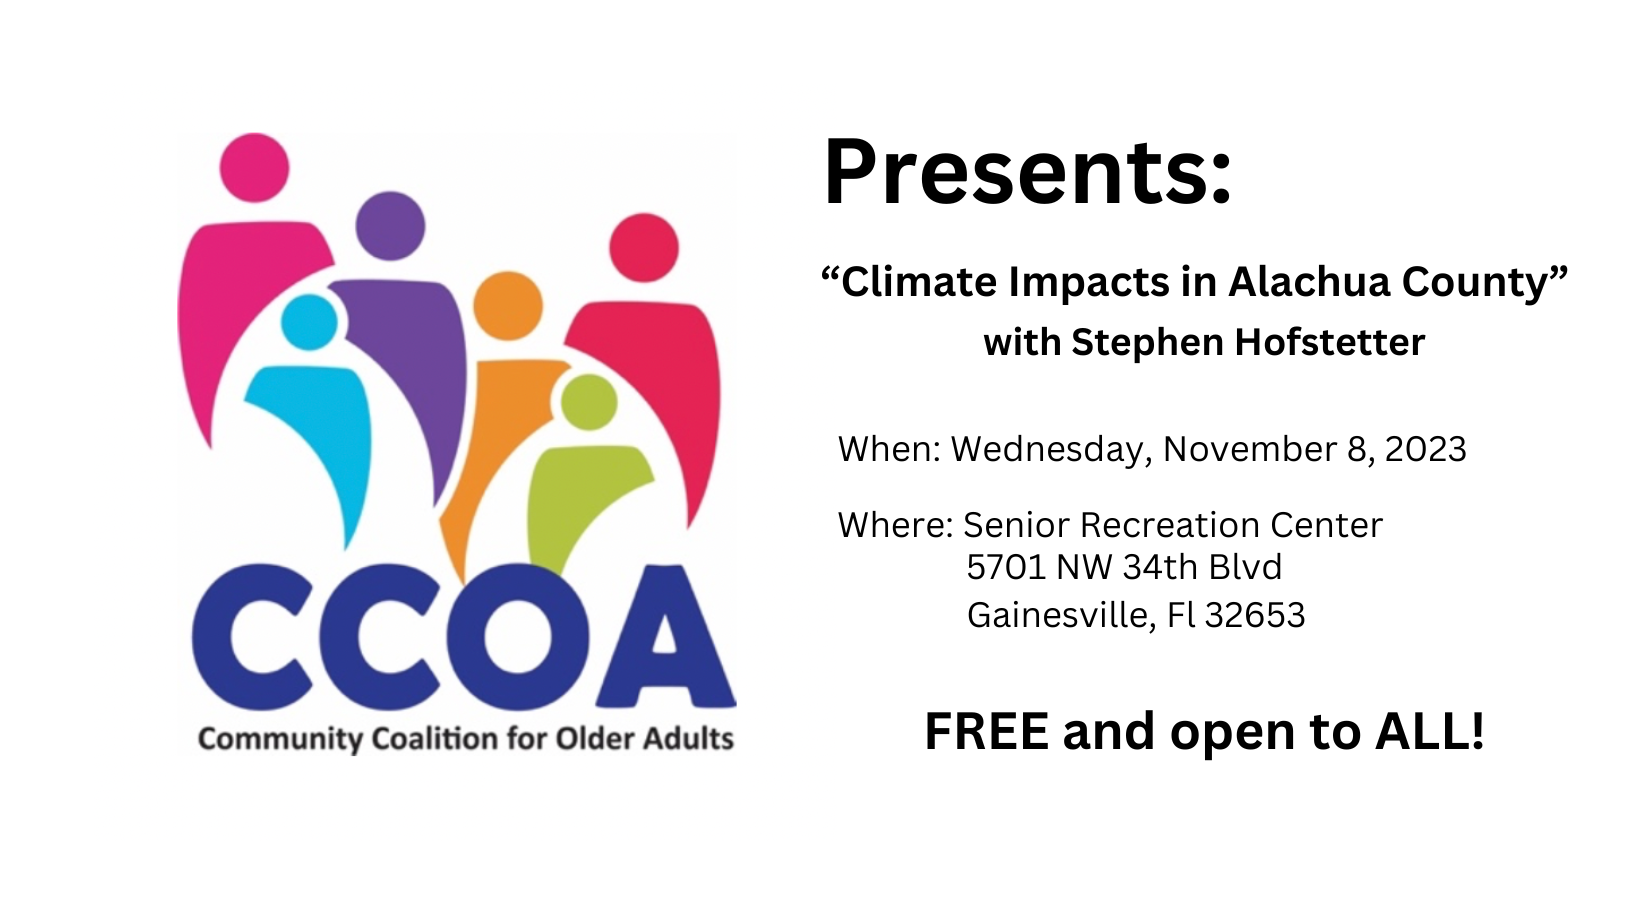 CCOA Logo on the left with event details on the right